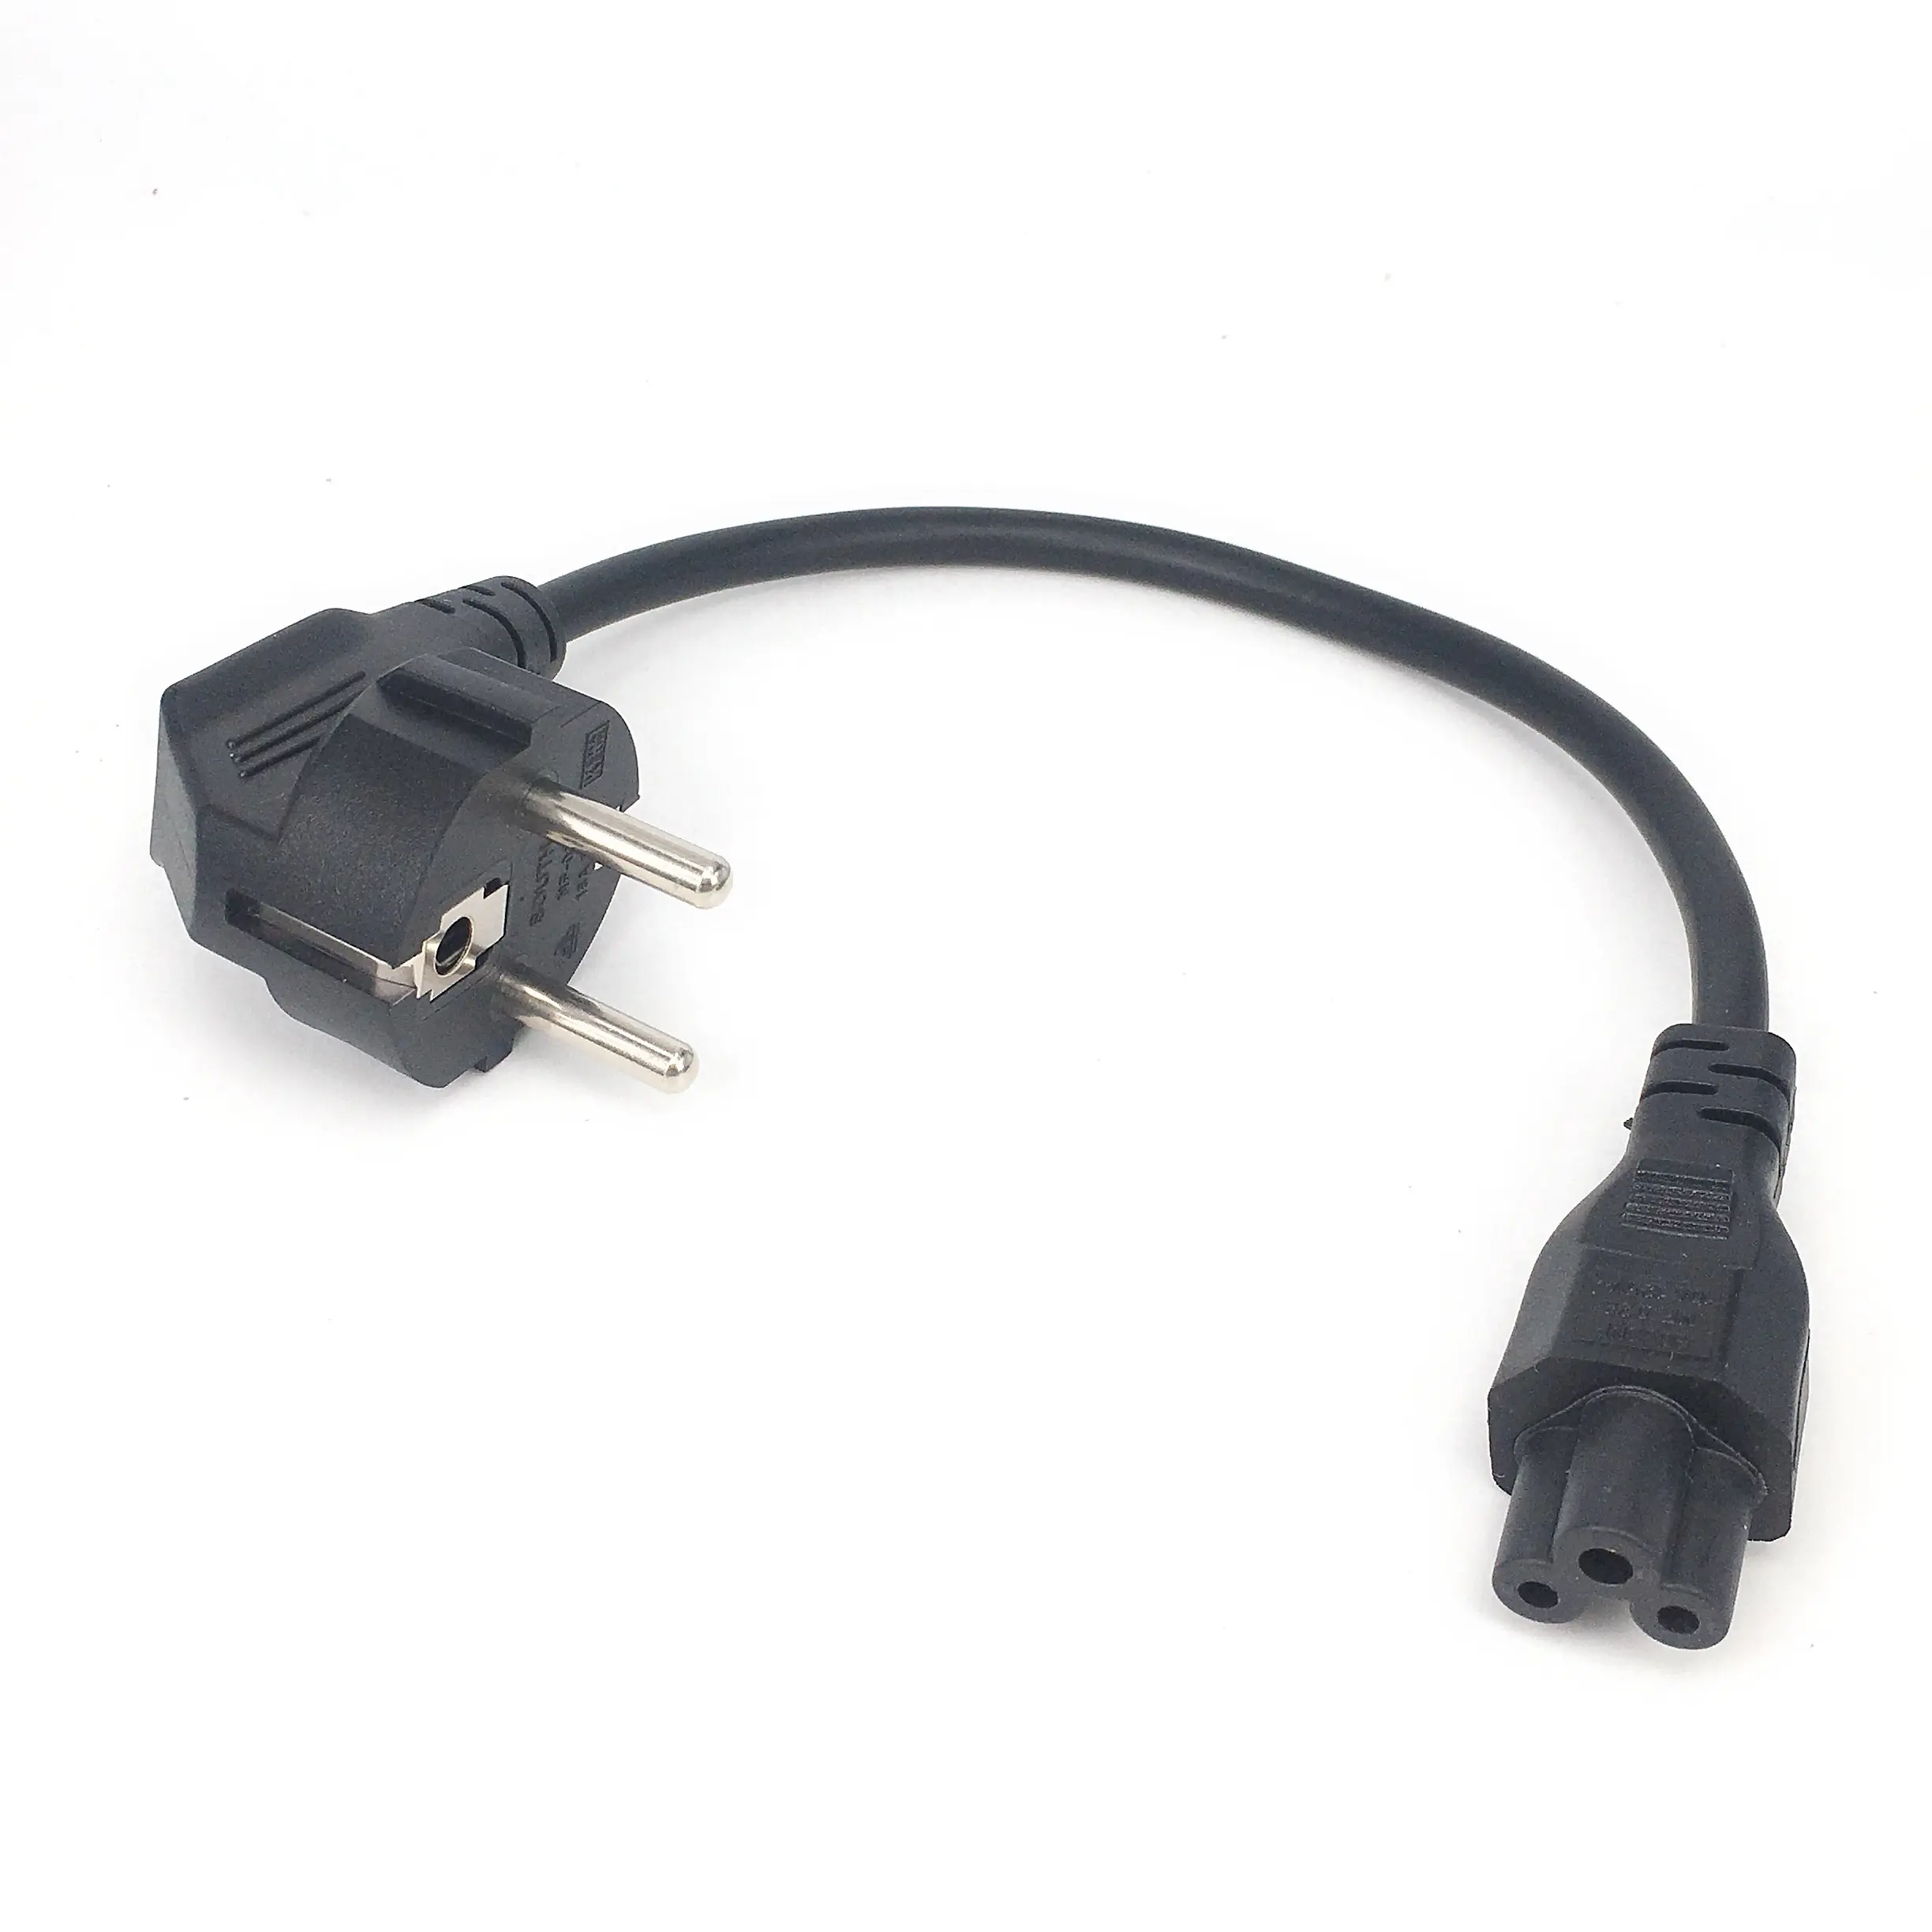 EU Computer Cables Laptop 3-pin Charger Plug Power Adapter Cord Cable For HP Dell Toshiba Sony ASUS Lenovo Samsung Notebook